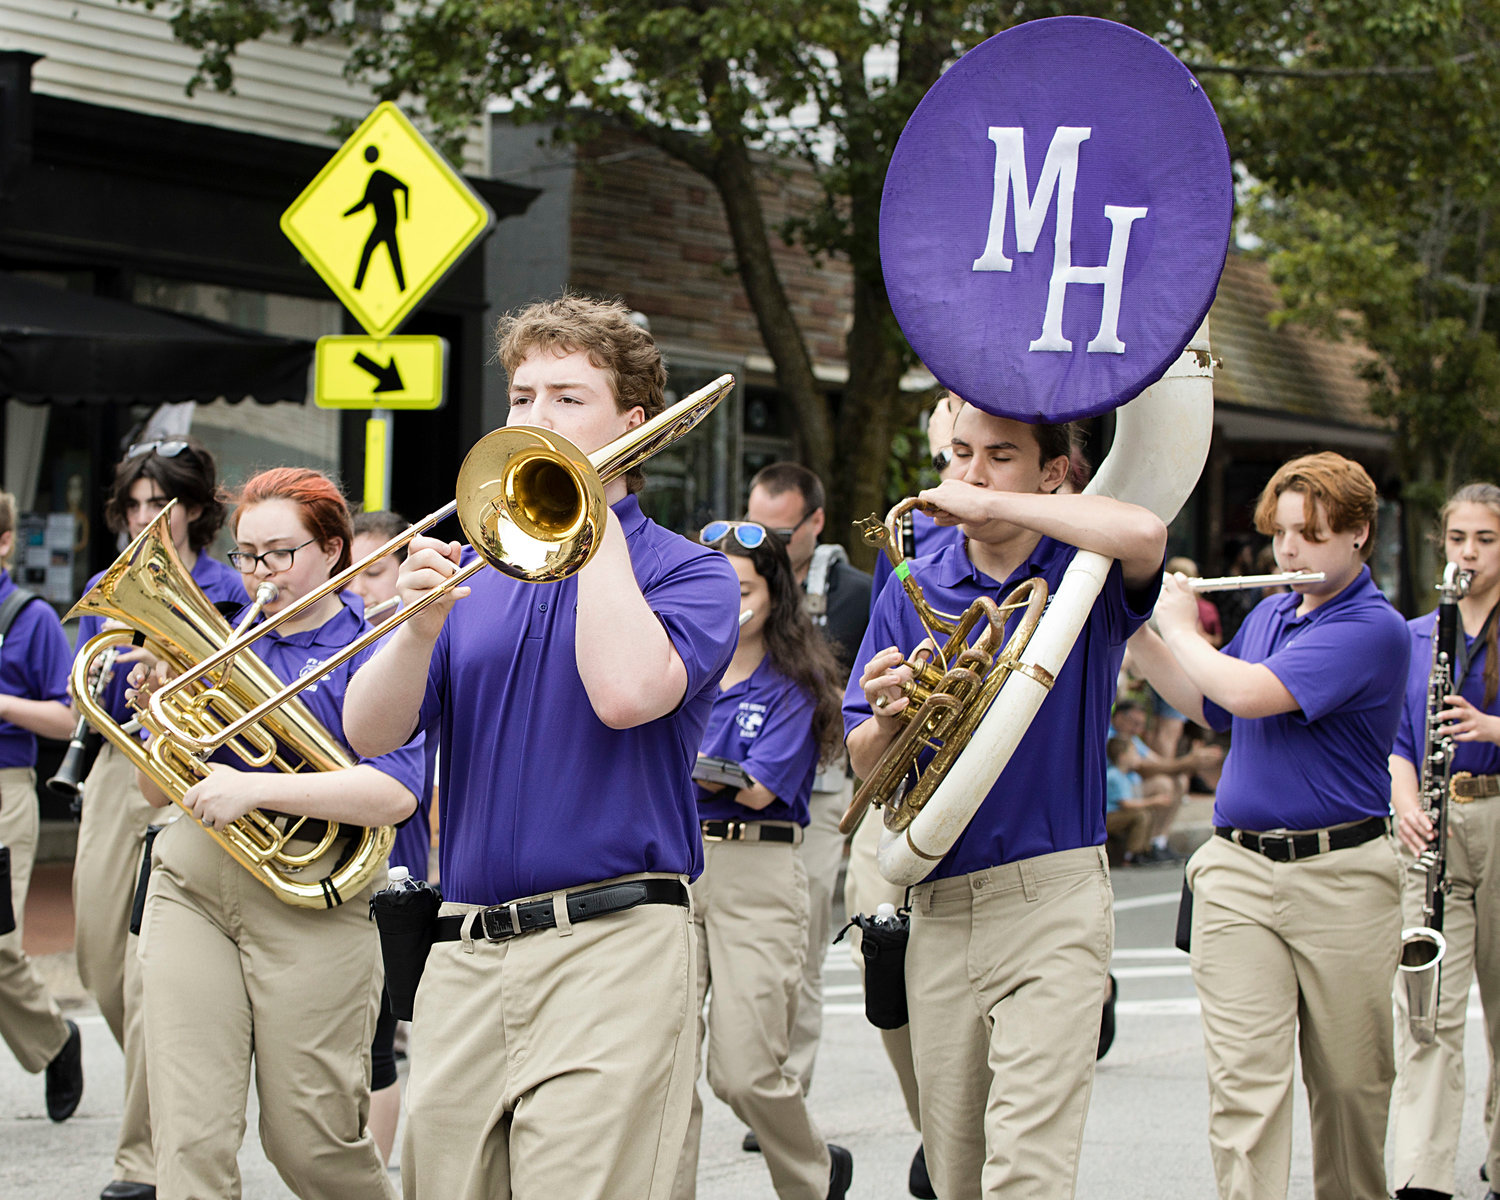 Members of the Mt. Hope High School Marching Band play a song as they march.